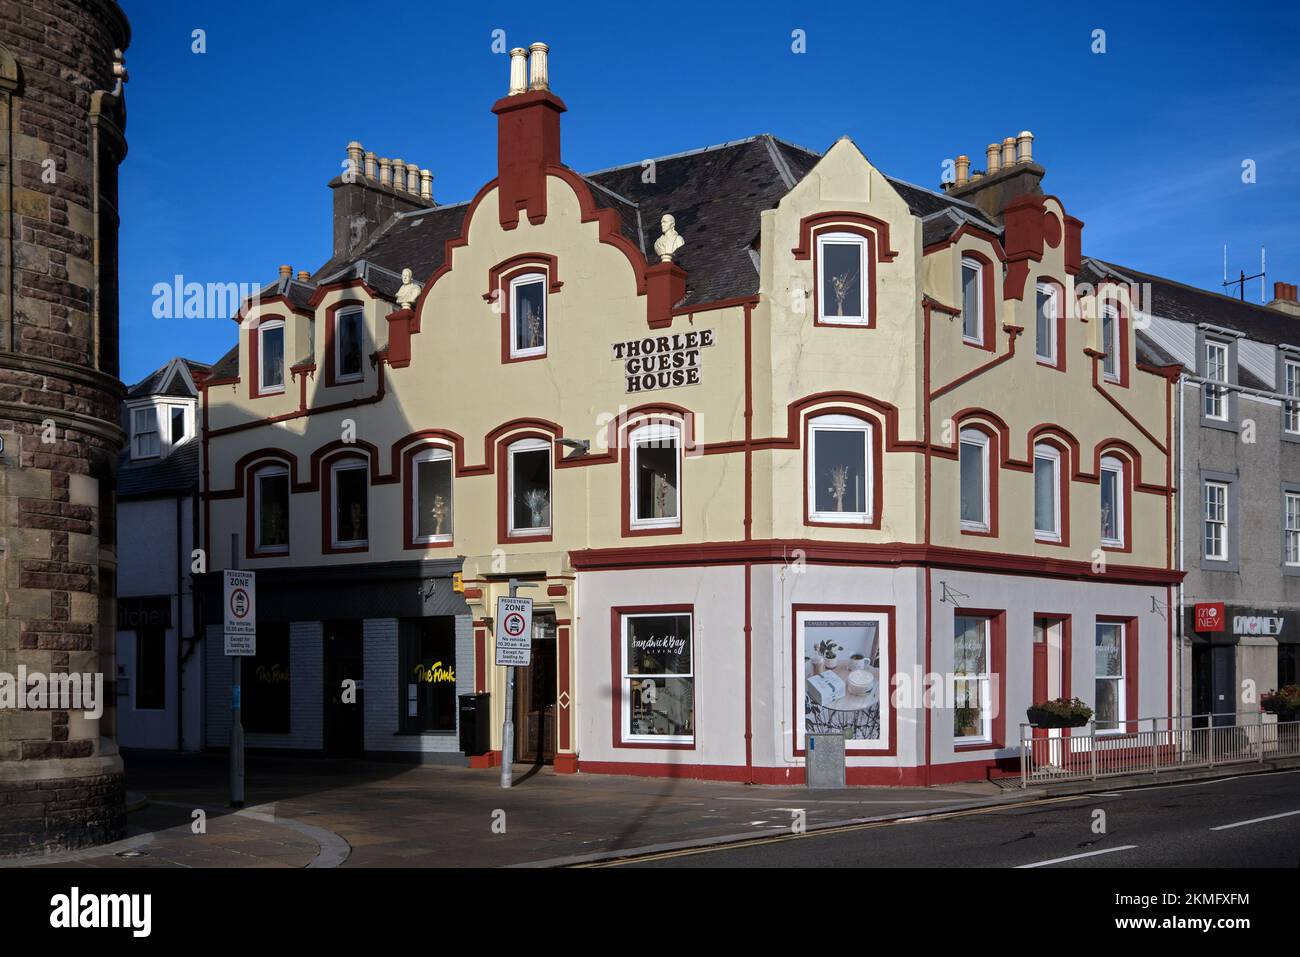 Thorlee Guest House, Stornoway, Outer Hebrides, Scotland, UK. Stock Photo